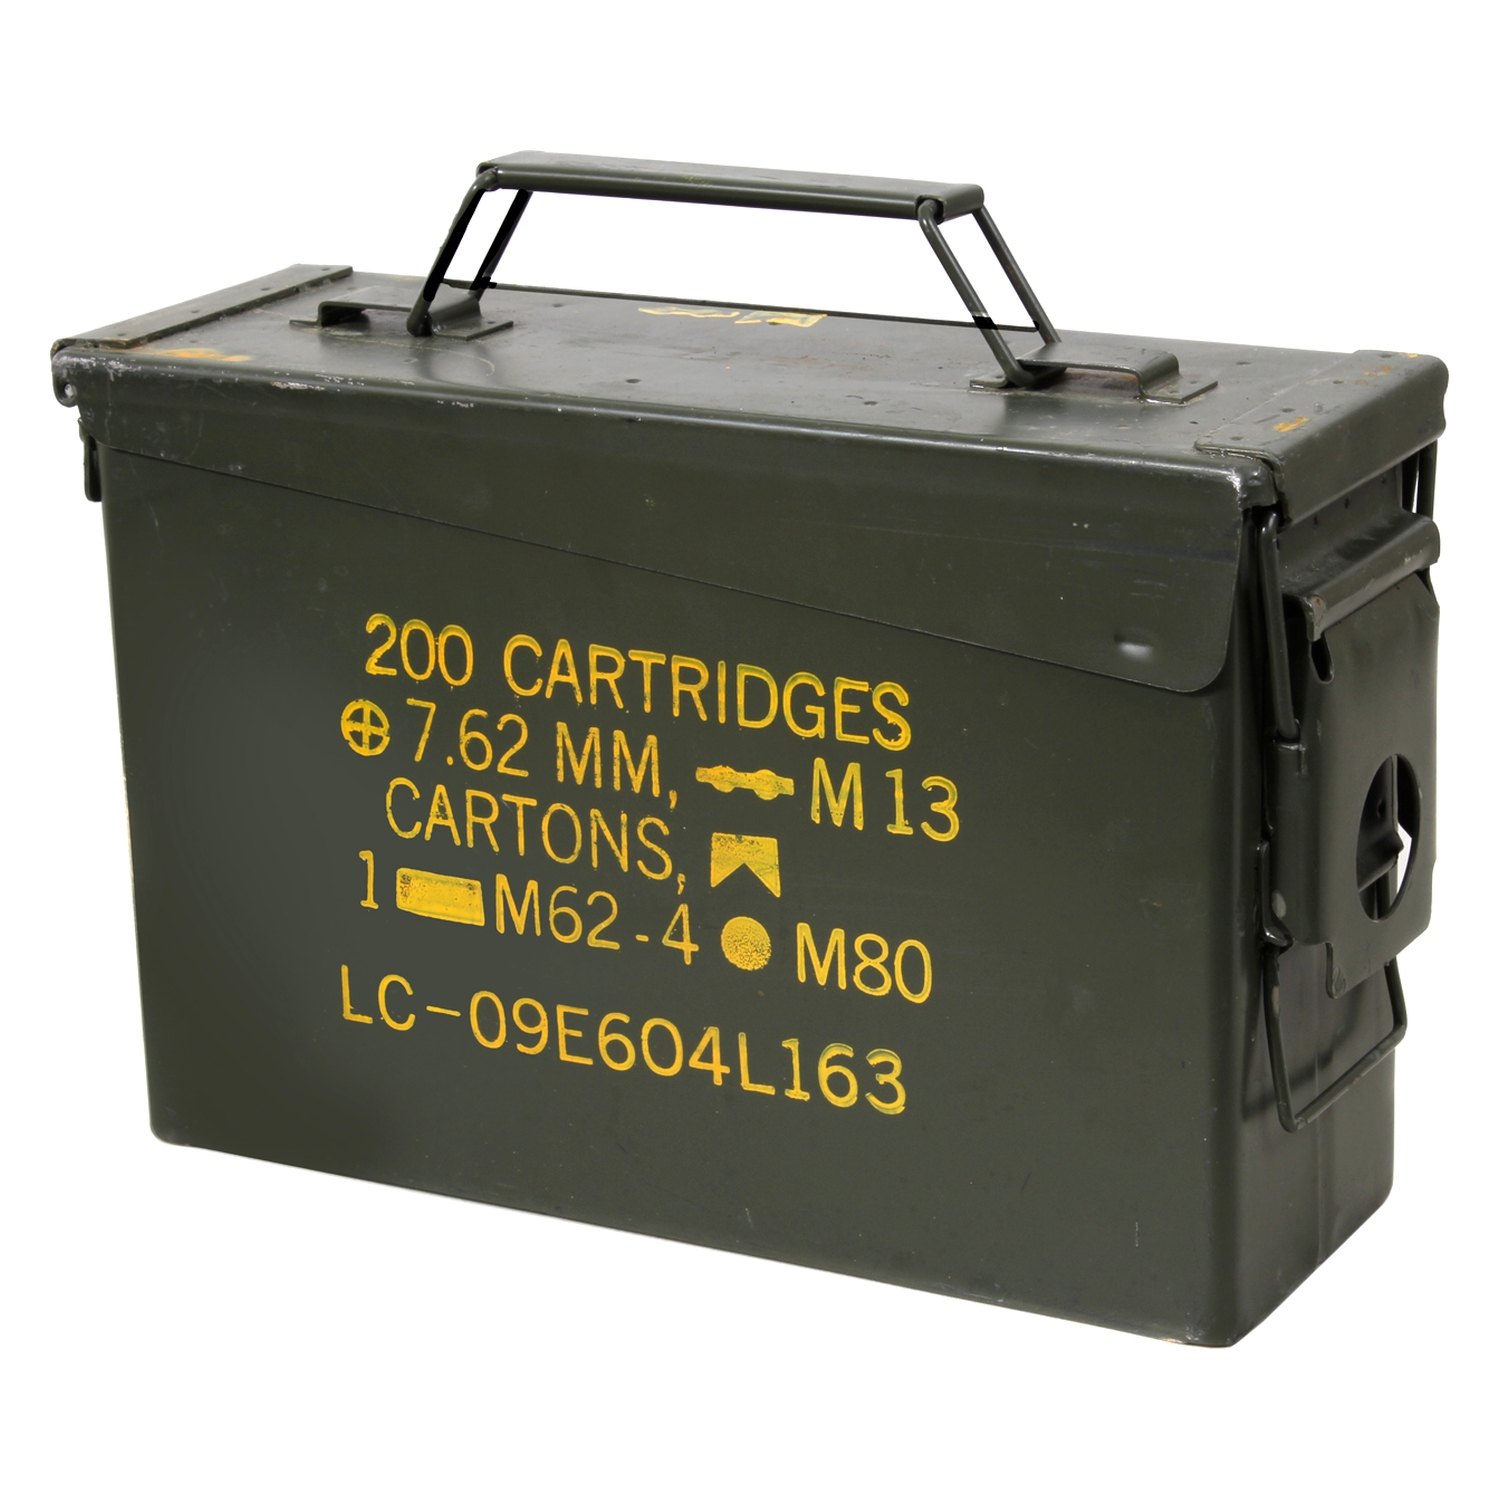 GI .30 10.25" x 6.5" x 3.5" Olive Drab Ammo Can by Rothco ®....